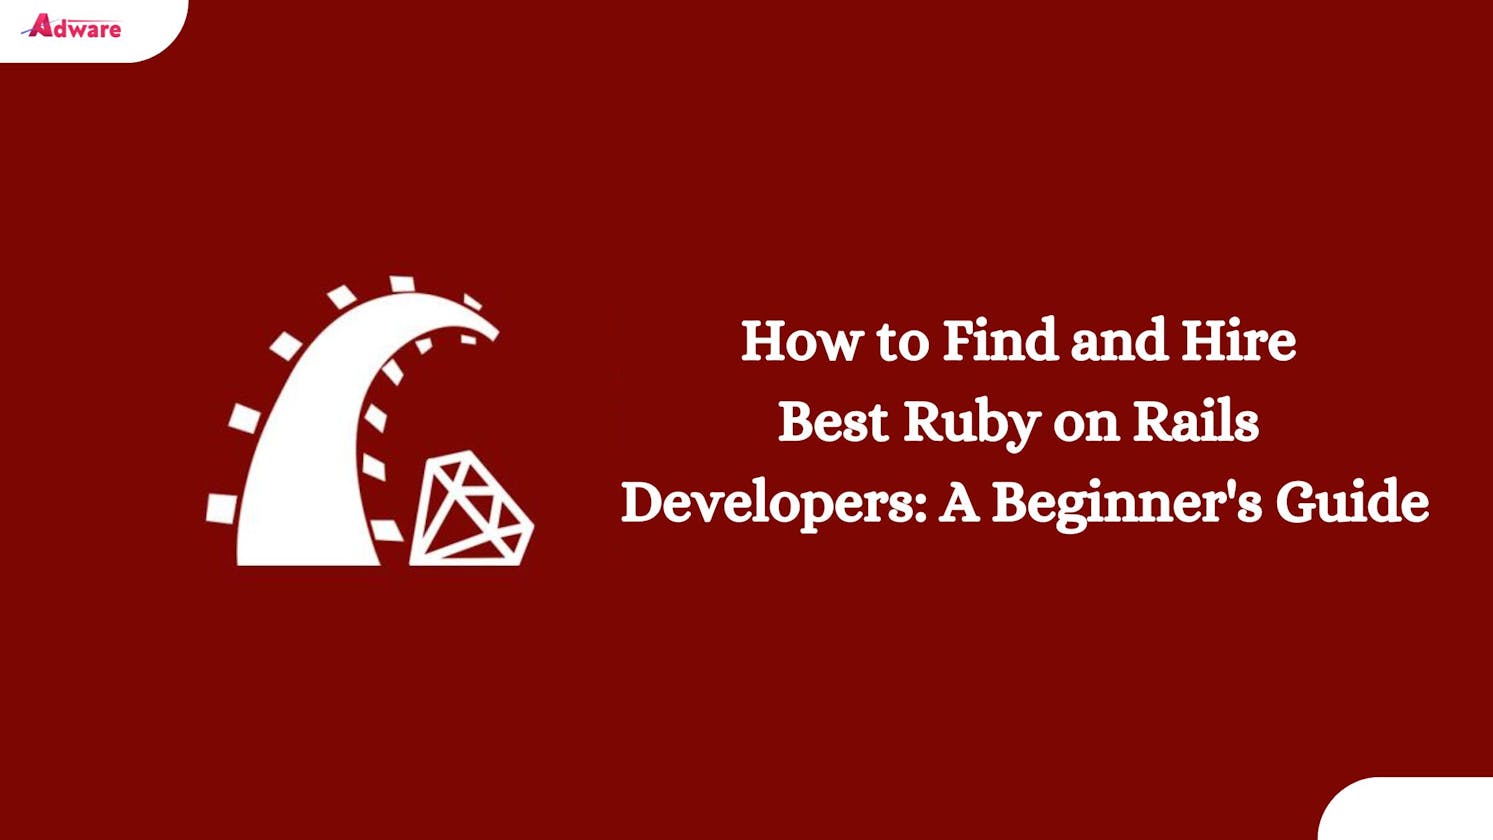 How to Find and Hire Best Ruby on Rails Developers: A Beginner's Guide